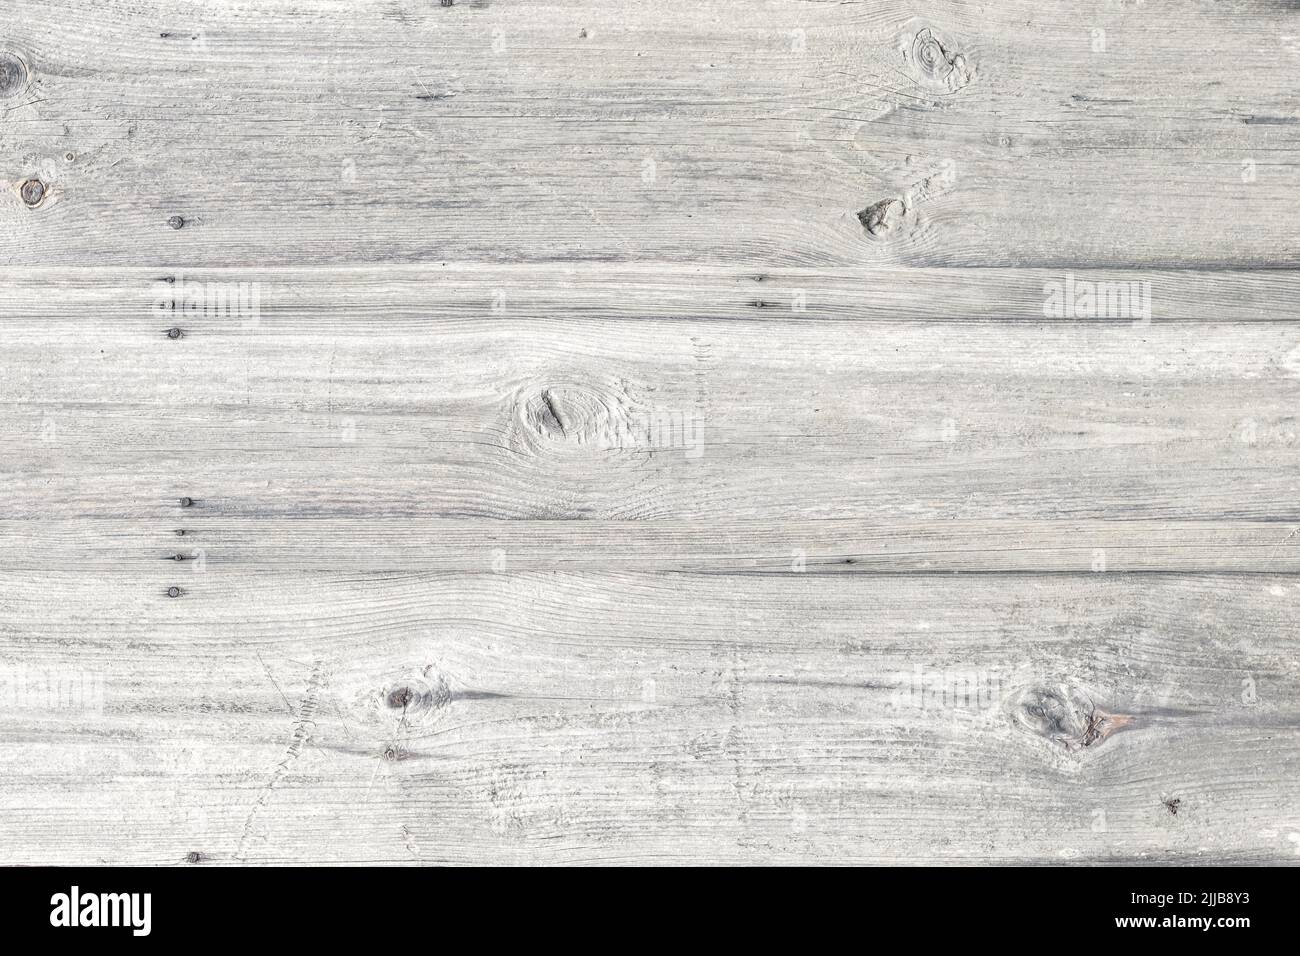 Natural light gray wooden texture background, horizontal boards, wall, old panel wood grain wallpaper. Rustic pattern for design. Template with blank Stock Photo